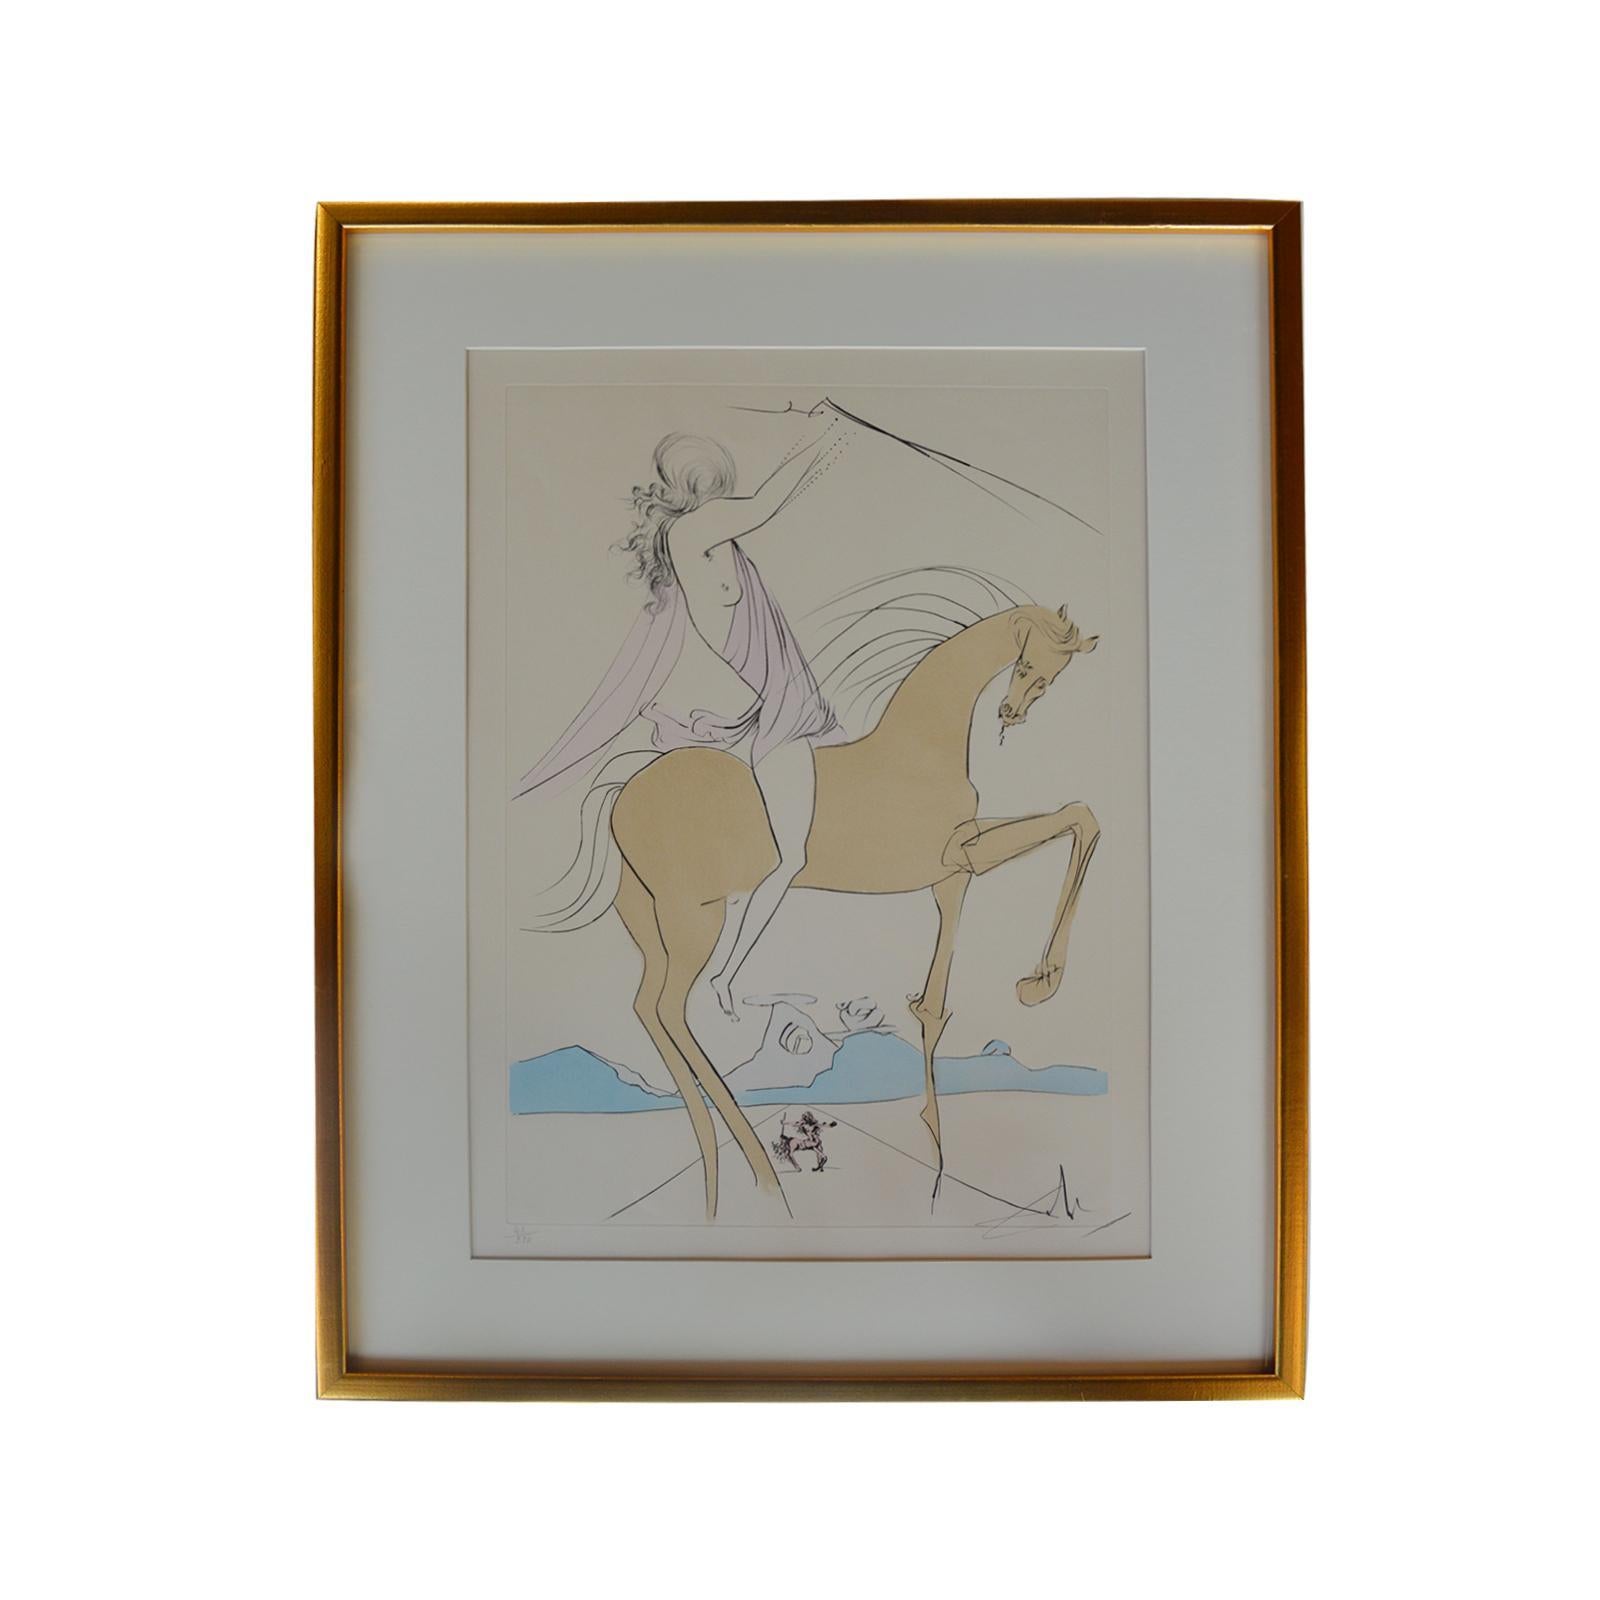 Pair of Salvador Dali (spanish 1904-1984) Two etchings on papers “Amazon” and “Cavalier a la rose”
Each depicting surrealist image on horseback, both signed lower right and edition number 42-220.